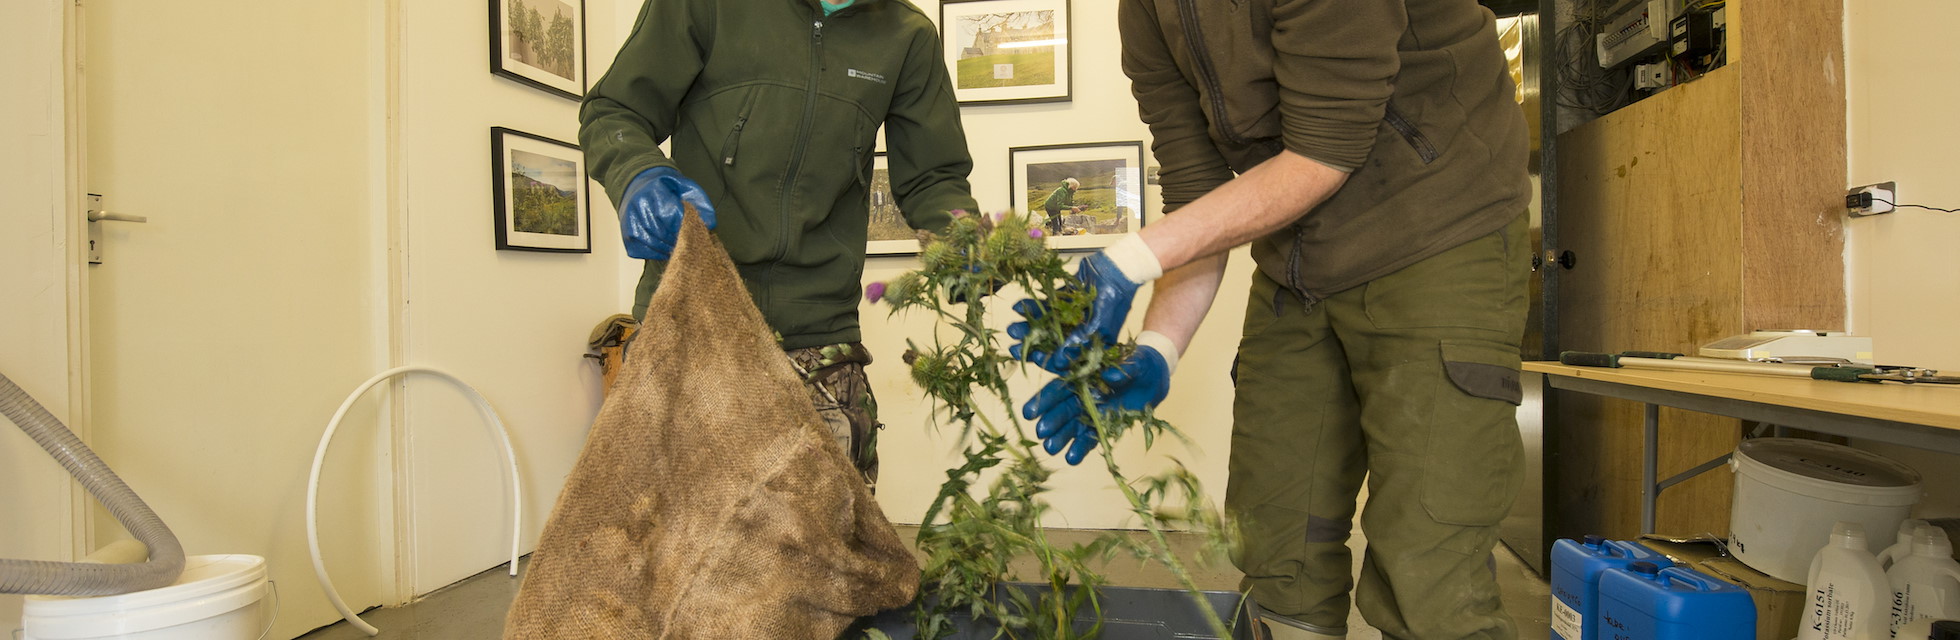 Neil and Ryan, two of Alladale&rsquo;s young rangers collect local plants like spear thistle that are blended into natural soaps and beauty products.